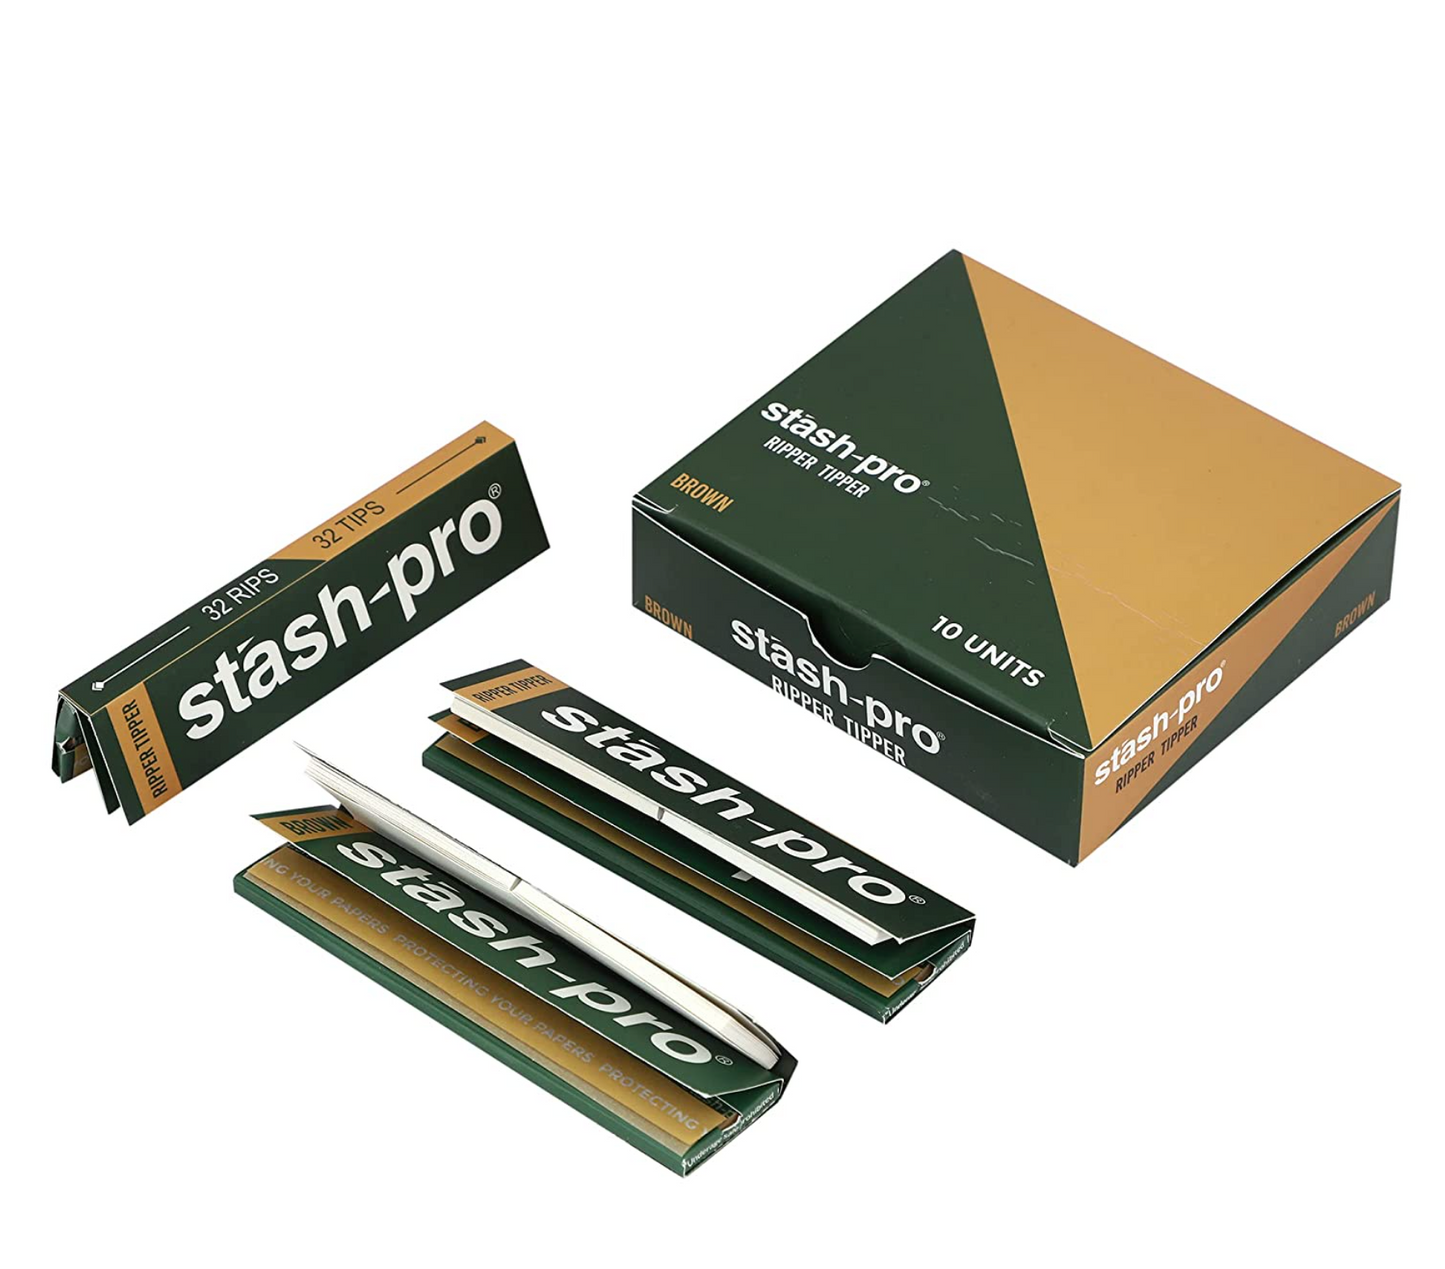 STASH-PRO Rolling Papers - Storm Chaser